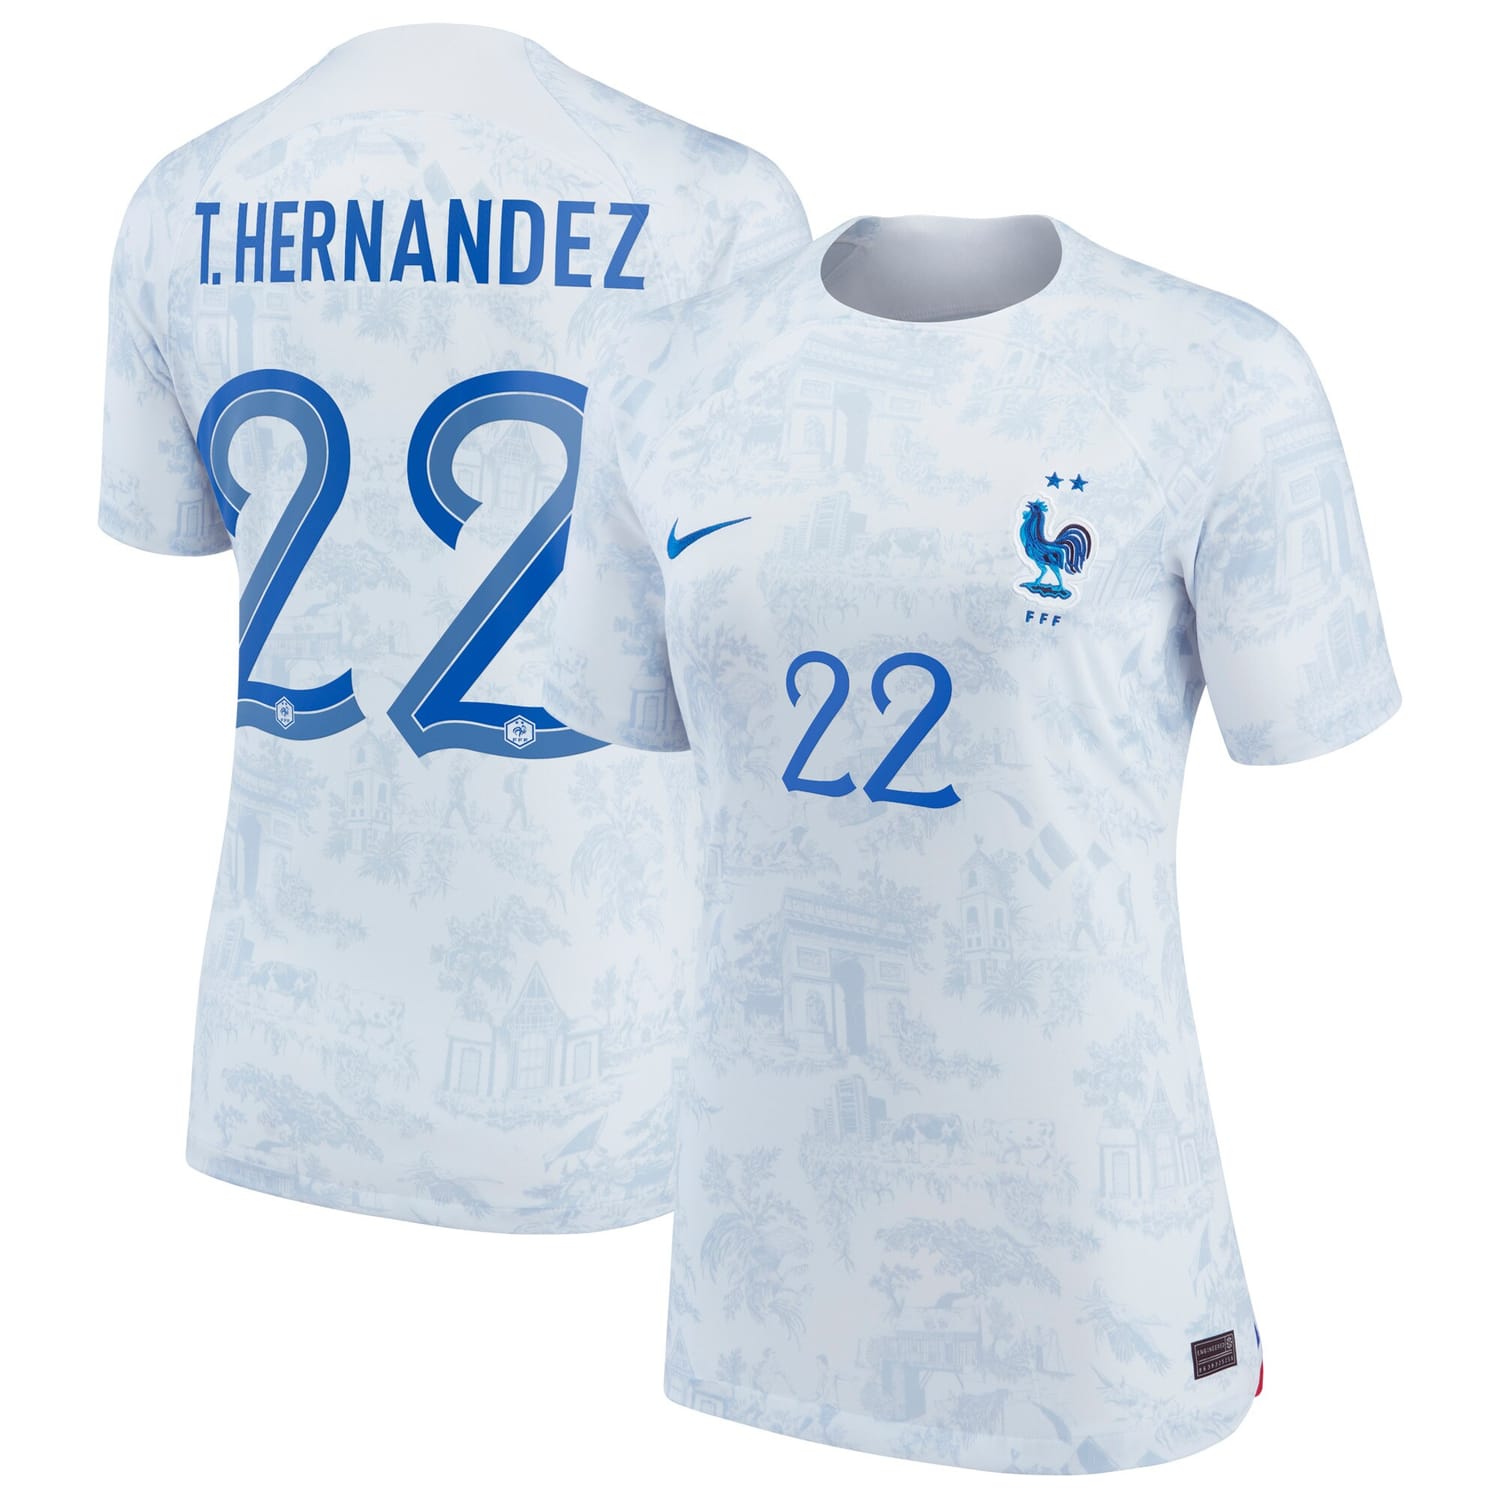 France National Team Away Jersey Shirt 2022 player Theo Hernandez printing for Women